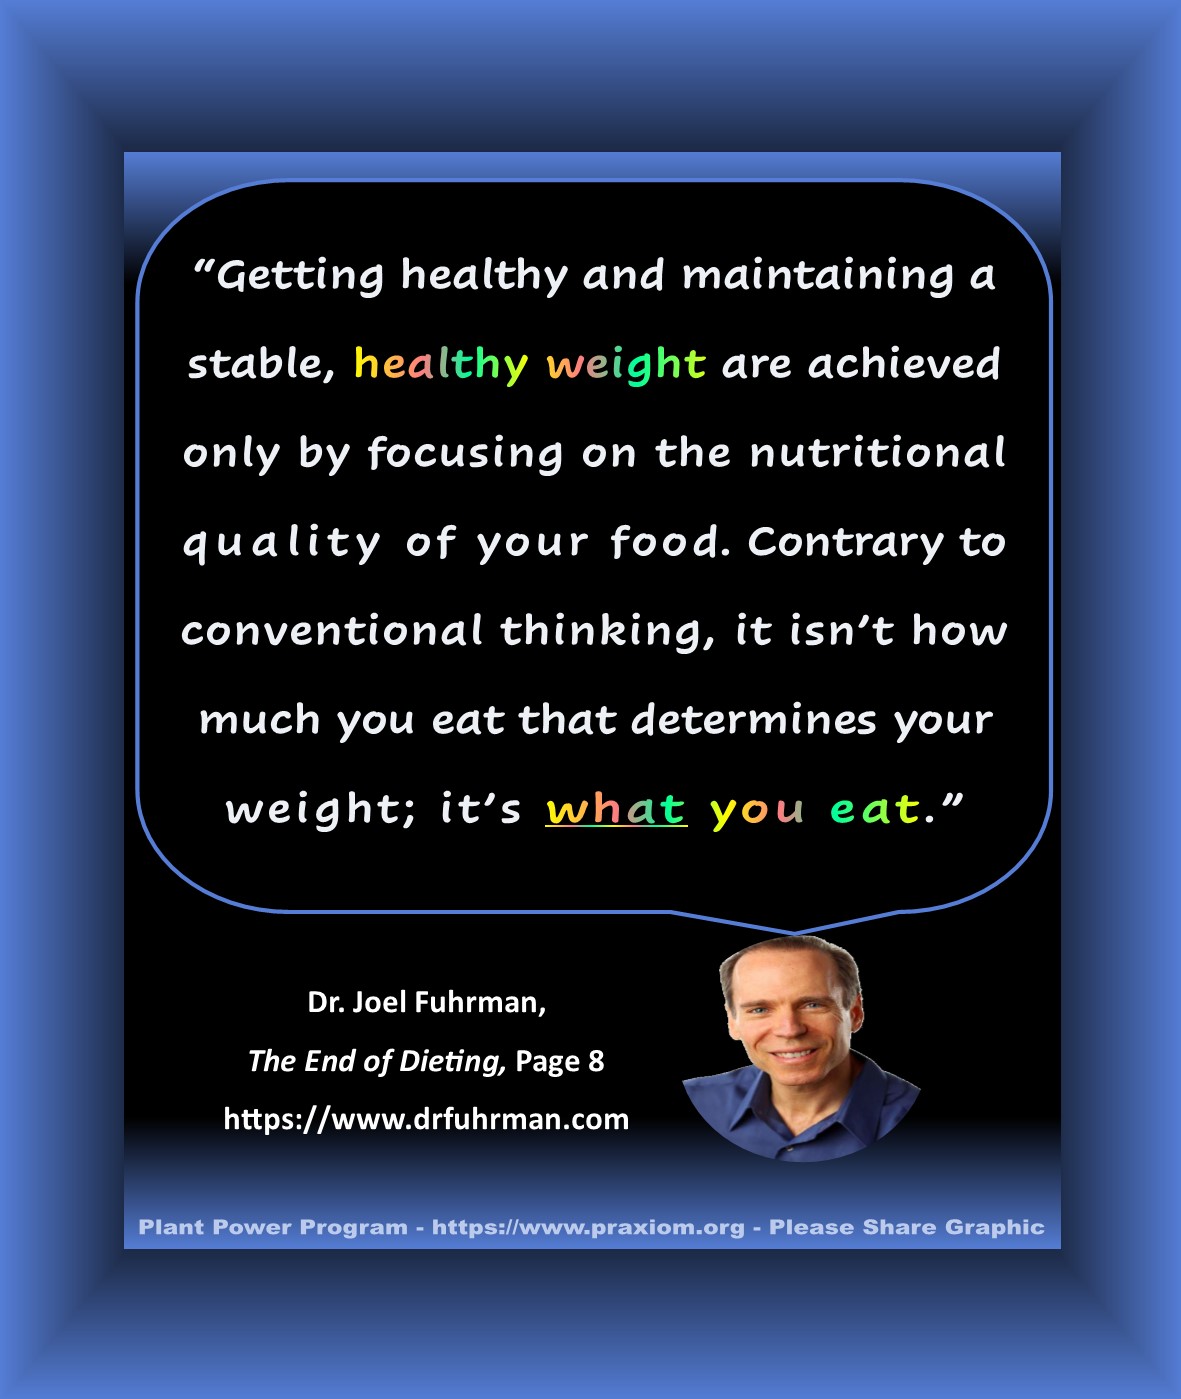 What        you eat determines your weight - Dr. Joel Fuhrman